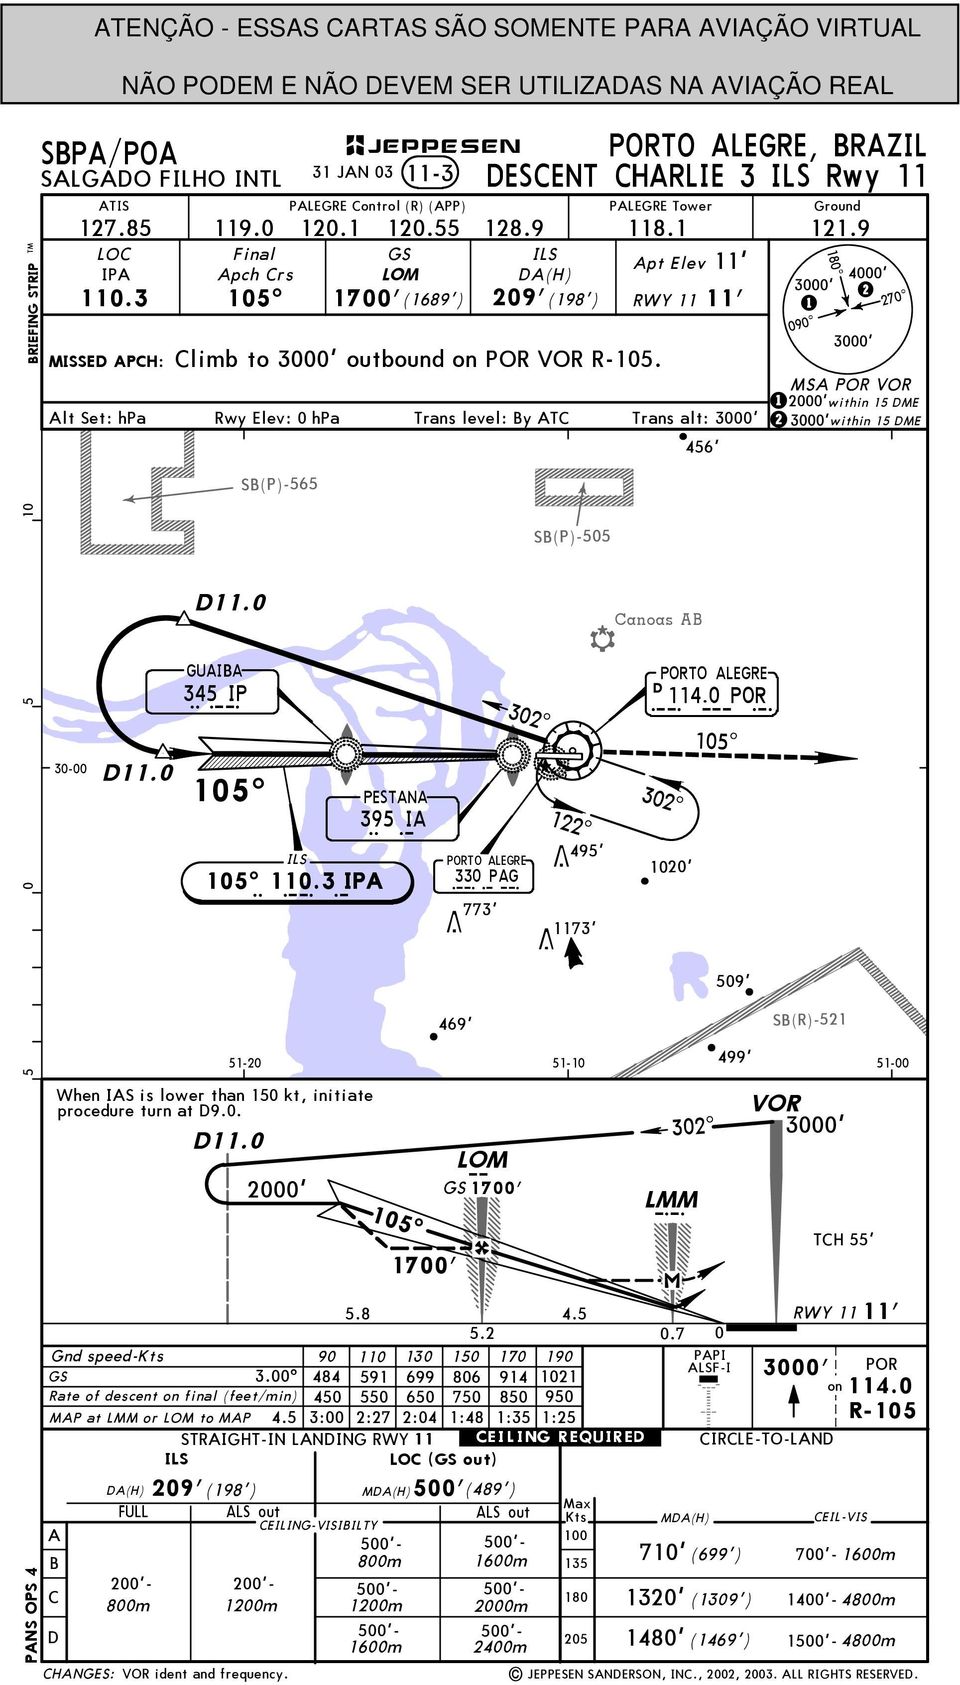 lt Set: hpa Rwy Elev: 0 hpa Trans level: y T Trans alt: 456' 1 2 1 090^ ^ 270^ MS POR VOR within 15 ME within 15 ME S(P)-565 11.0 11.0 345 GUI IP ILS I P 110.